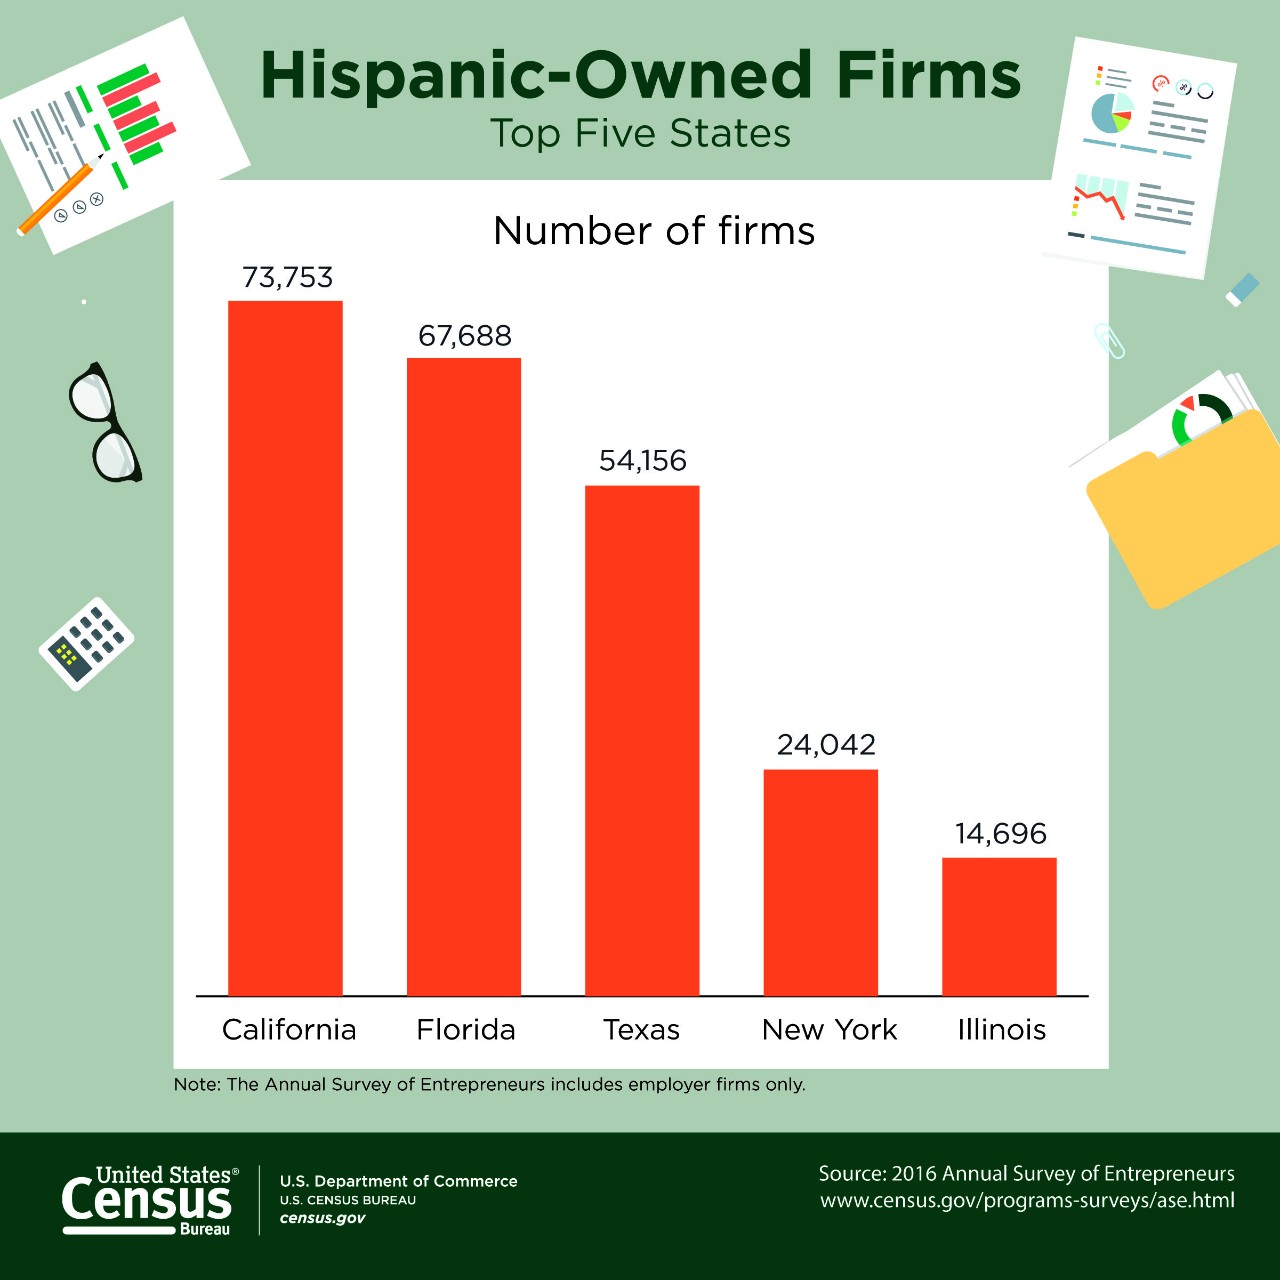 Hispanic-Owned Firms